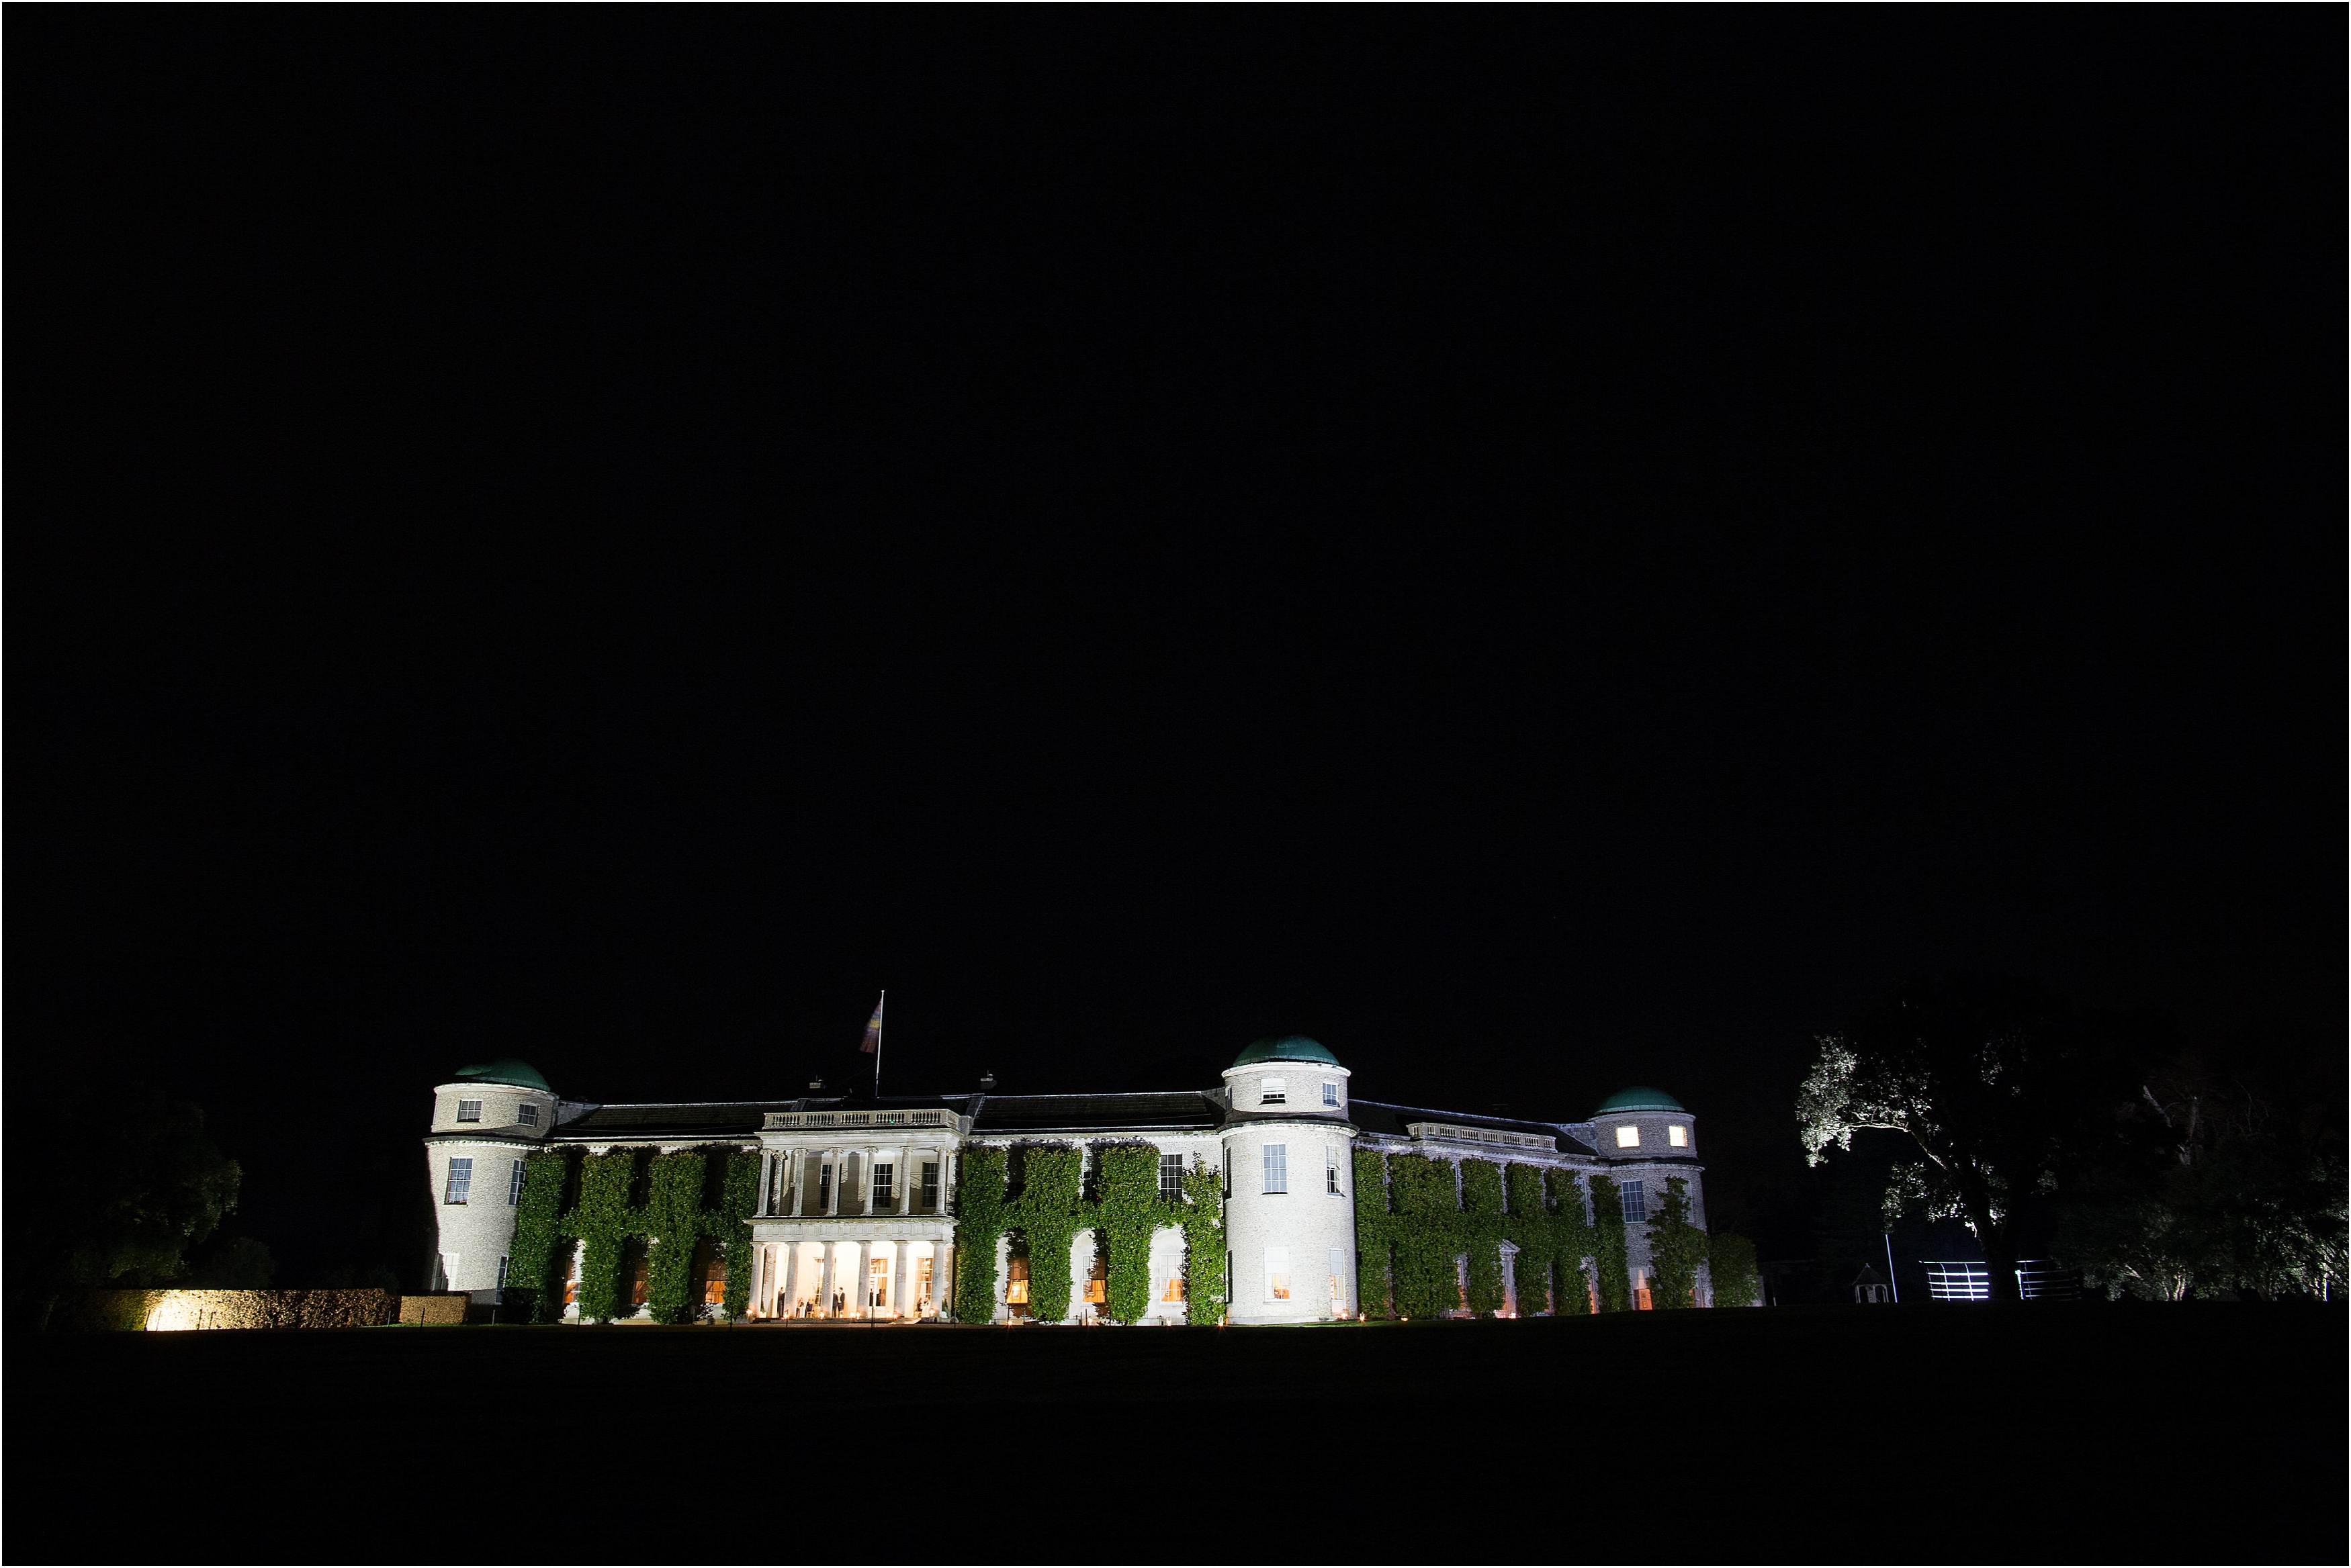 Goodwood House at night